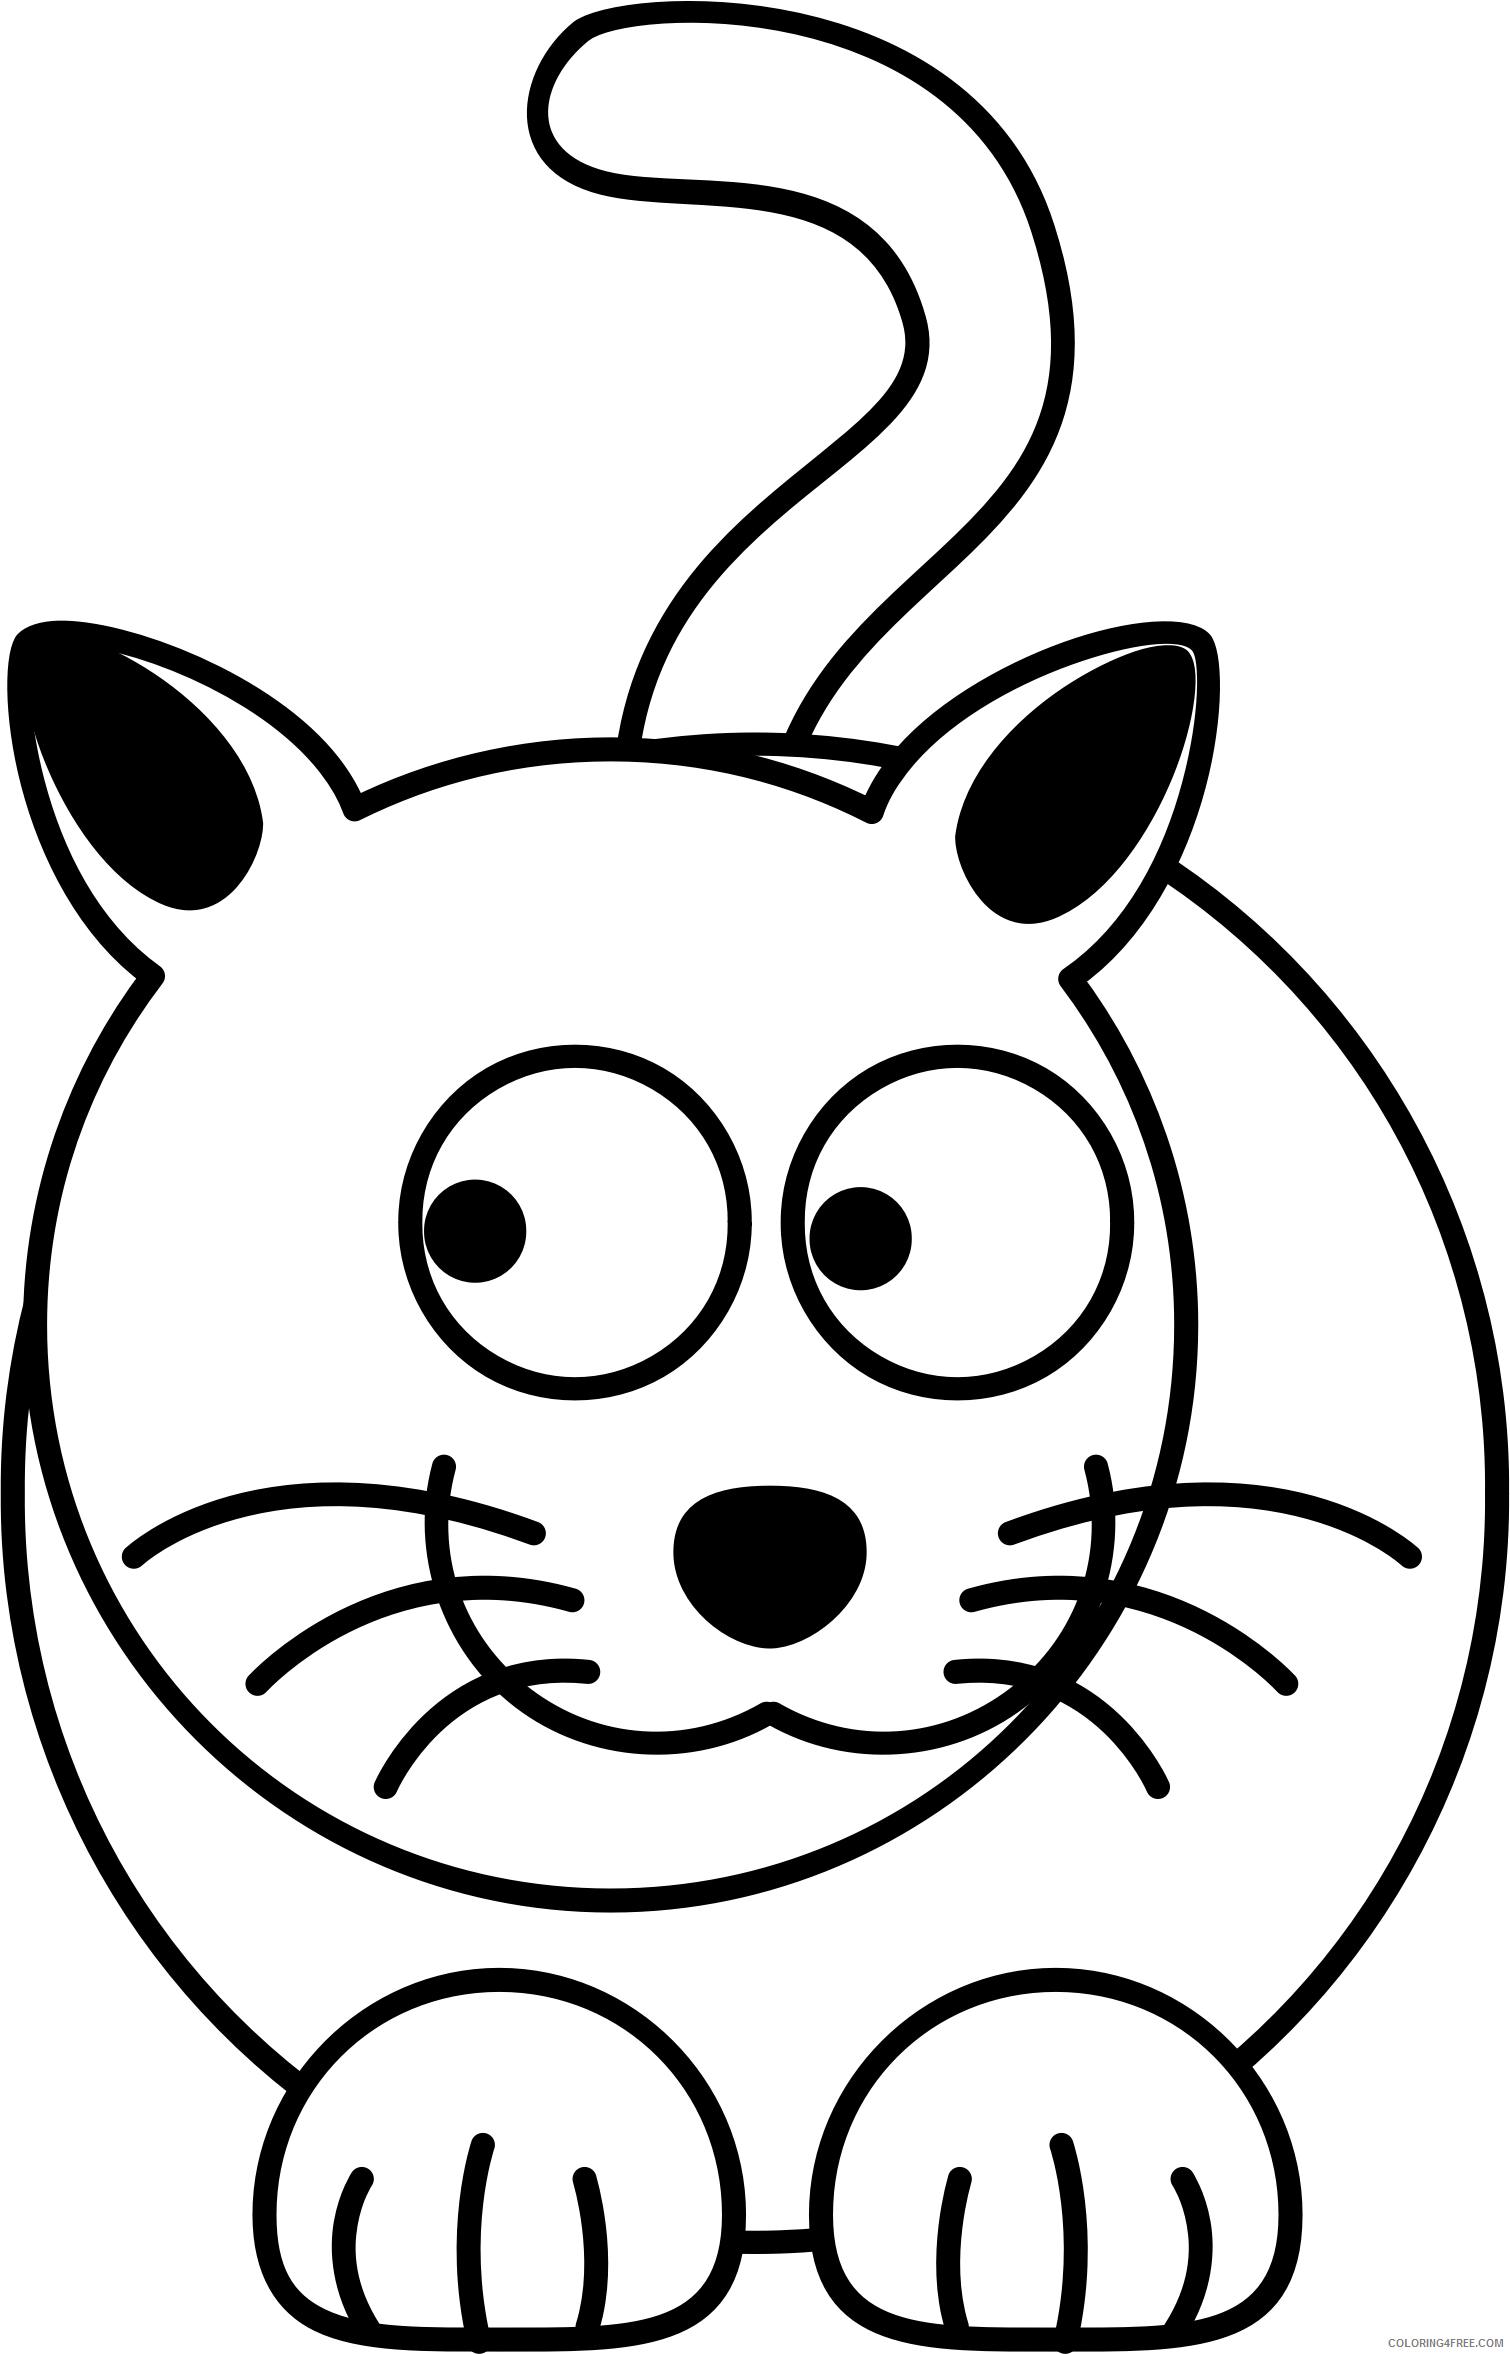 Kitty Cat Coloring Pages kitty cat 4 bpng Printable Coloring4free ...